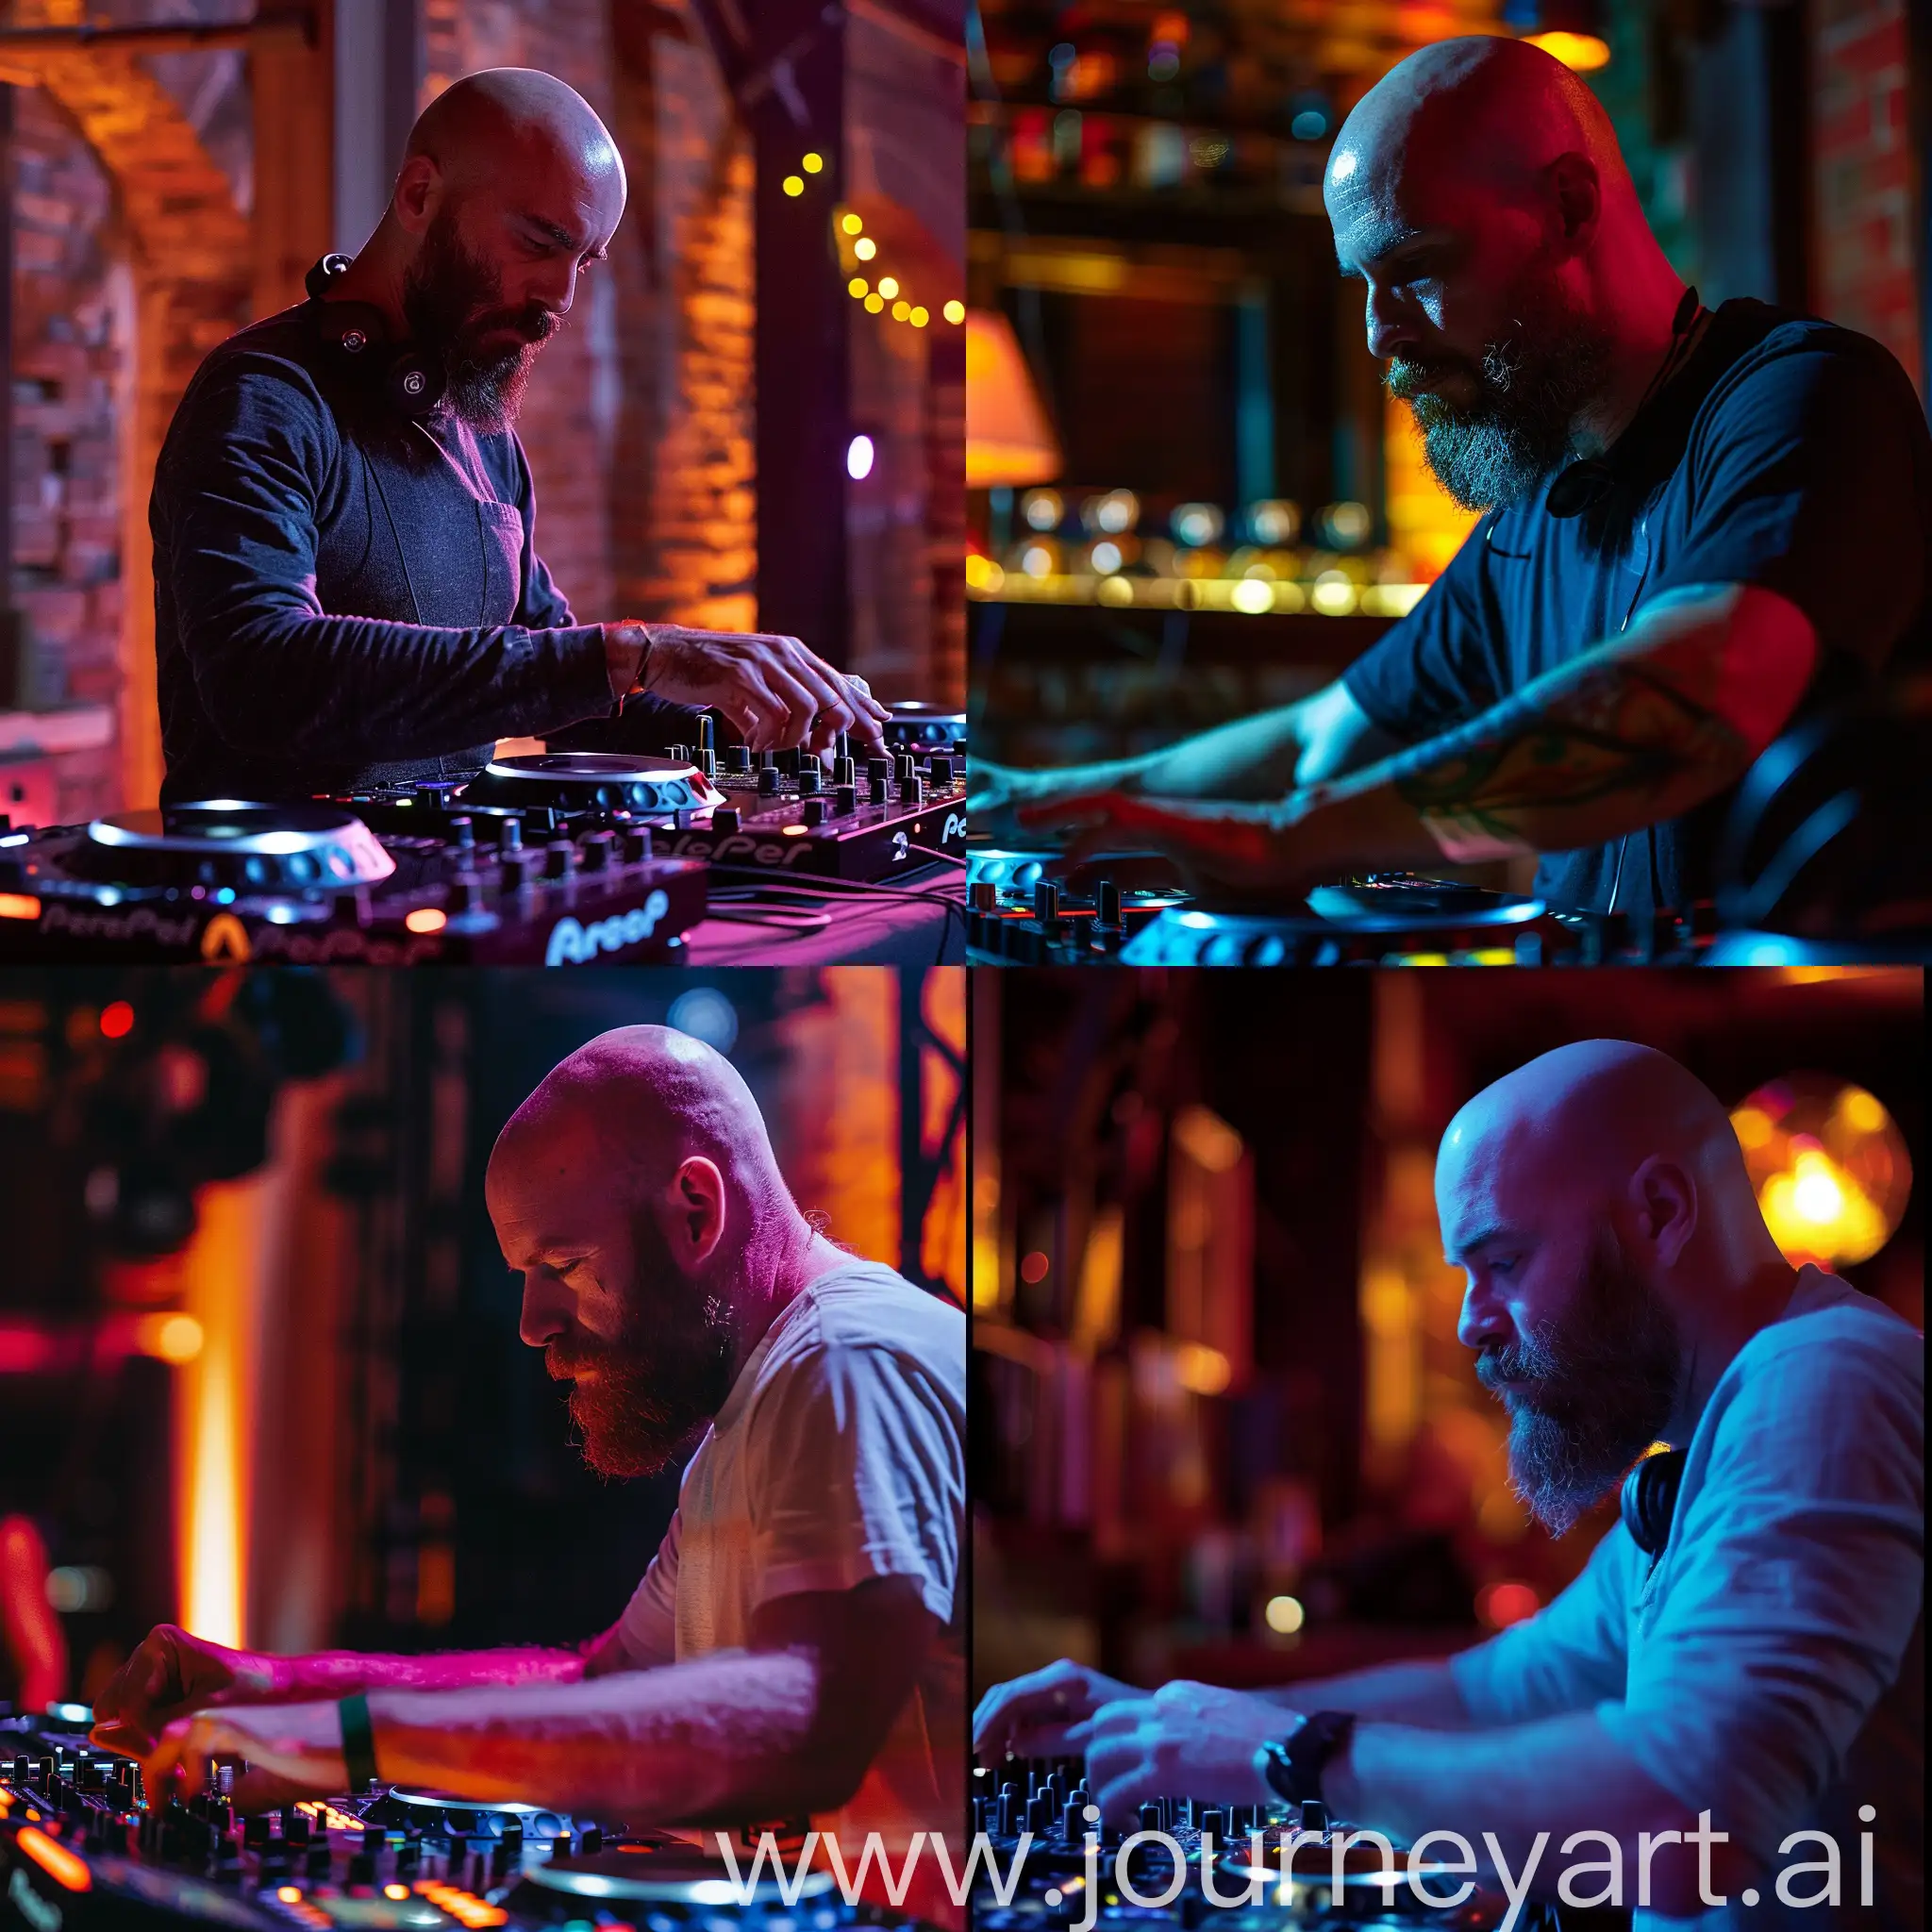 A bald and bearded DJ doing his job in a festive atmosphere with dimmed lighting.